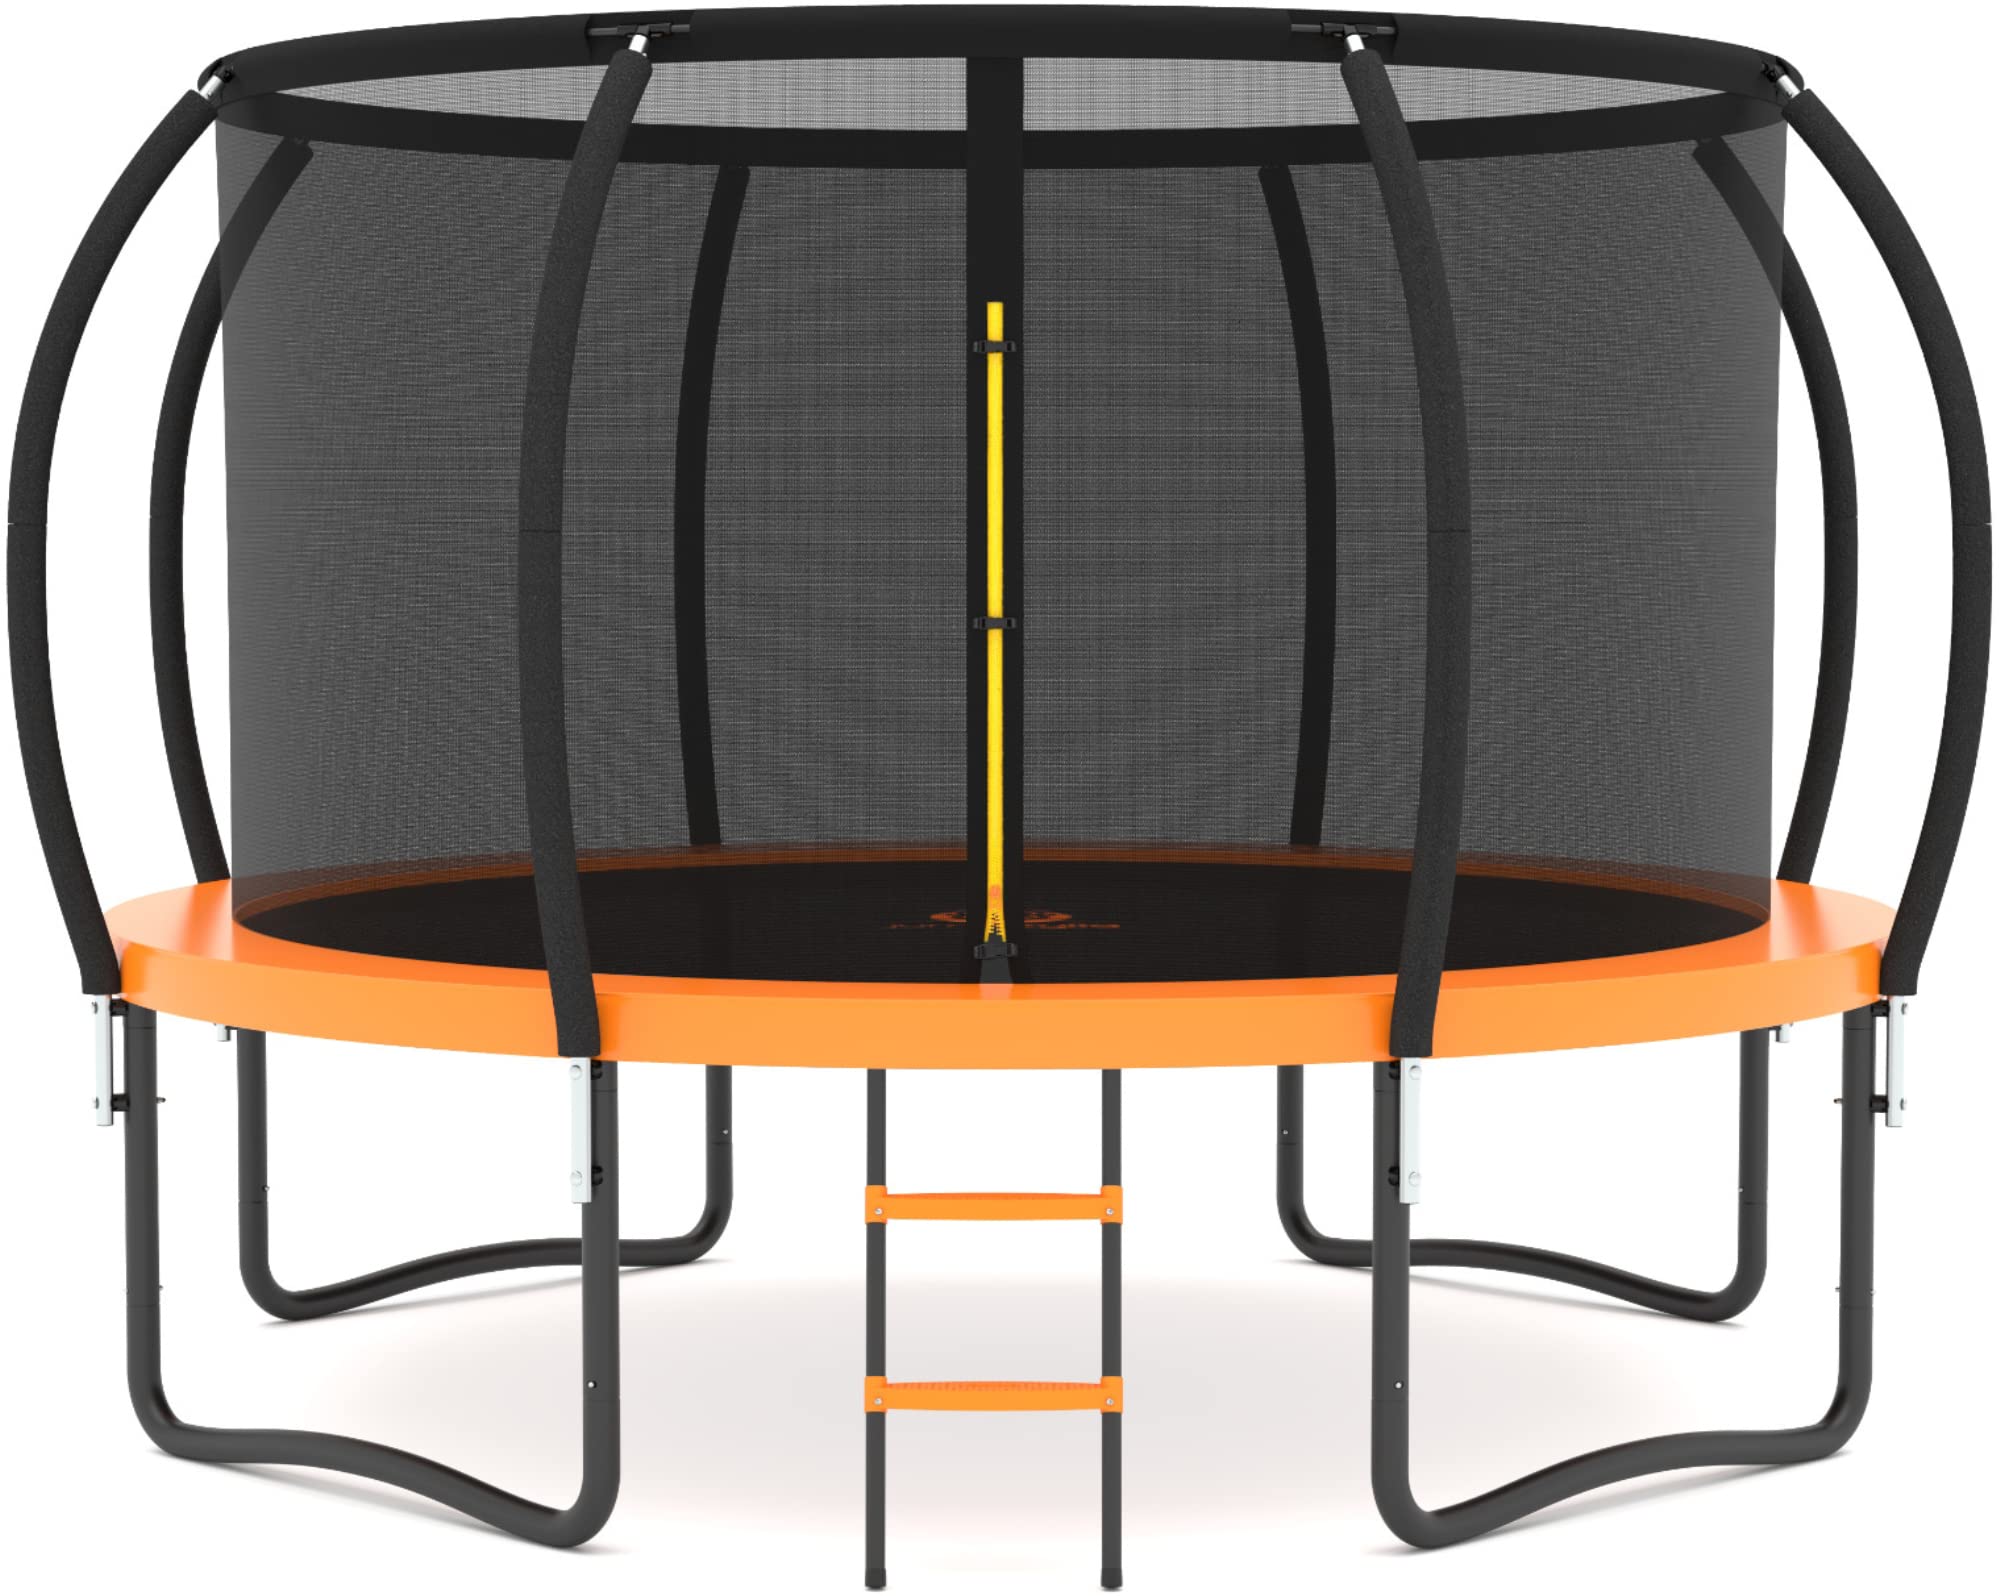 JUMPZYLLA Trampoline 8FT 10FT 12FT 14FT Trampoline with Enclosure - Recreational Trampolines with Ladder and galvanized Anti-Rus